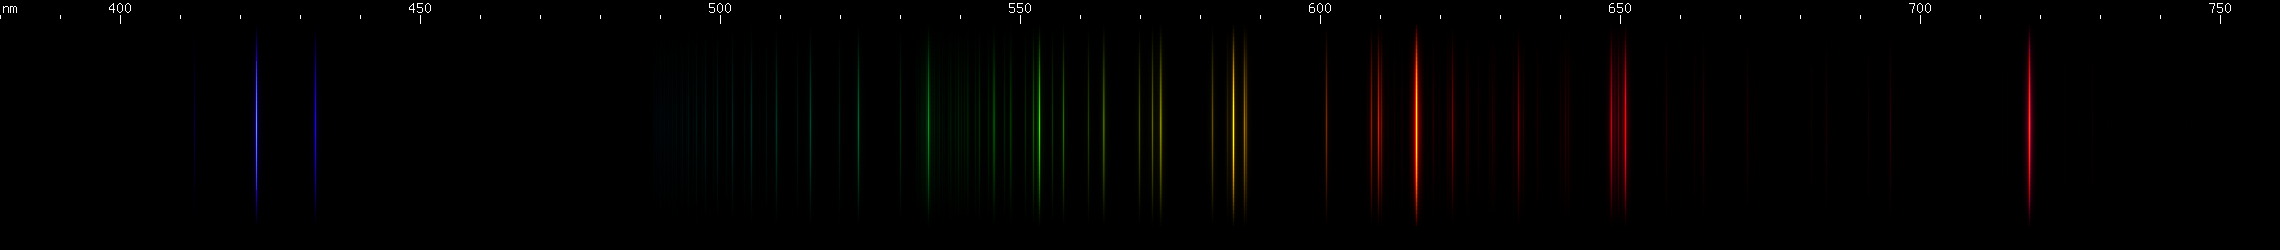 Spectral lines of Francium.